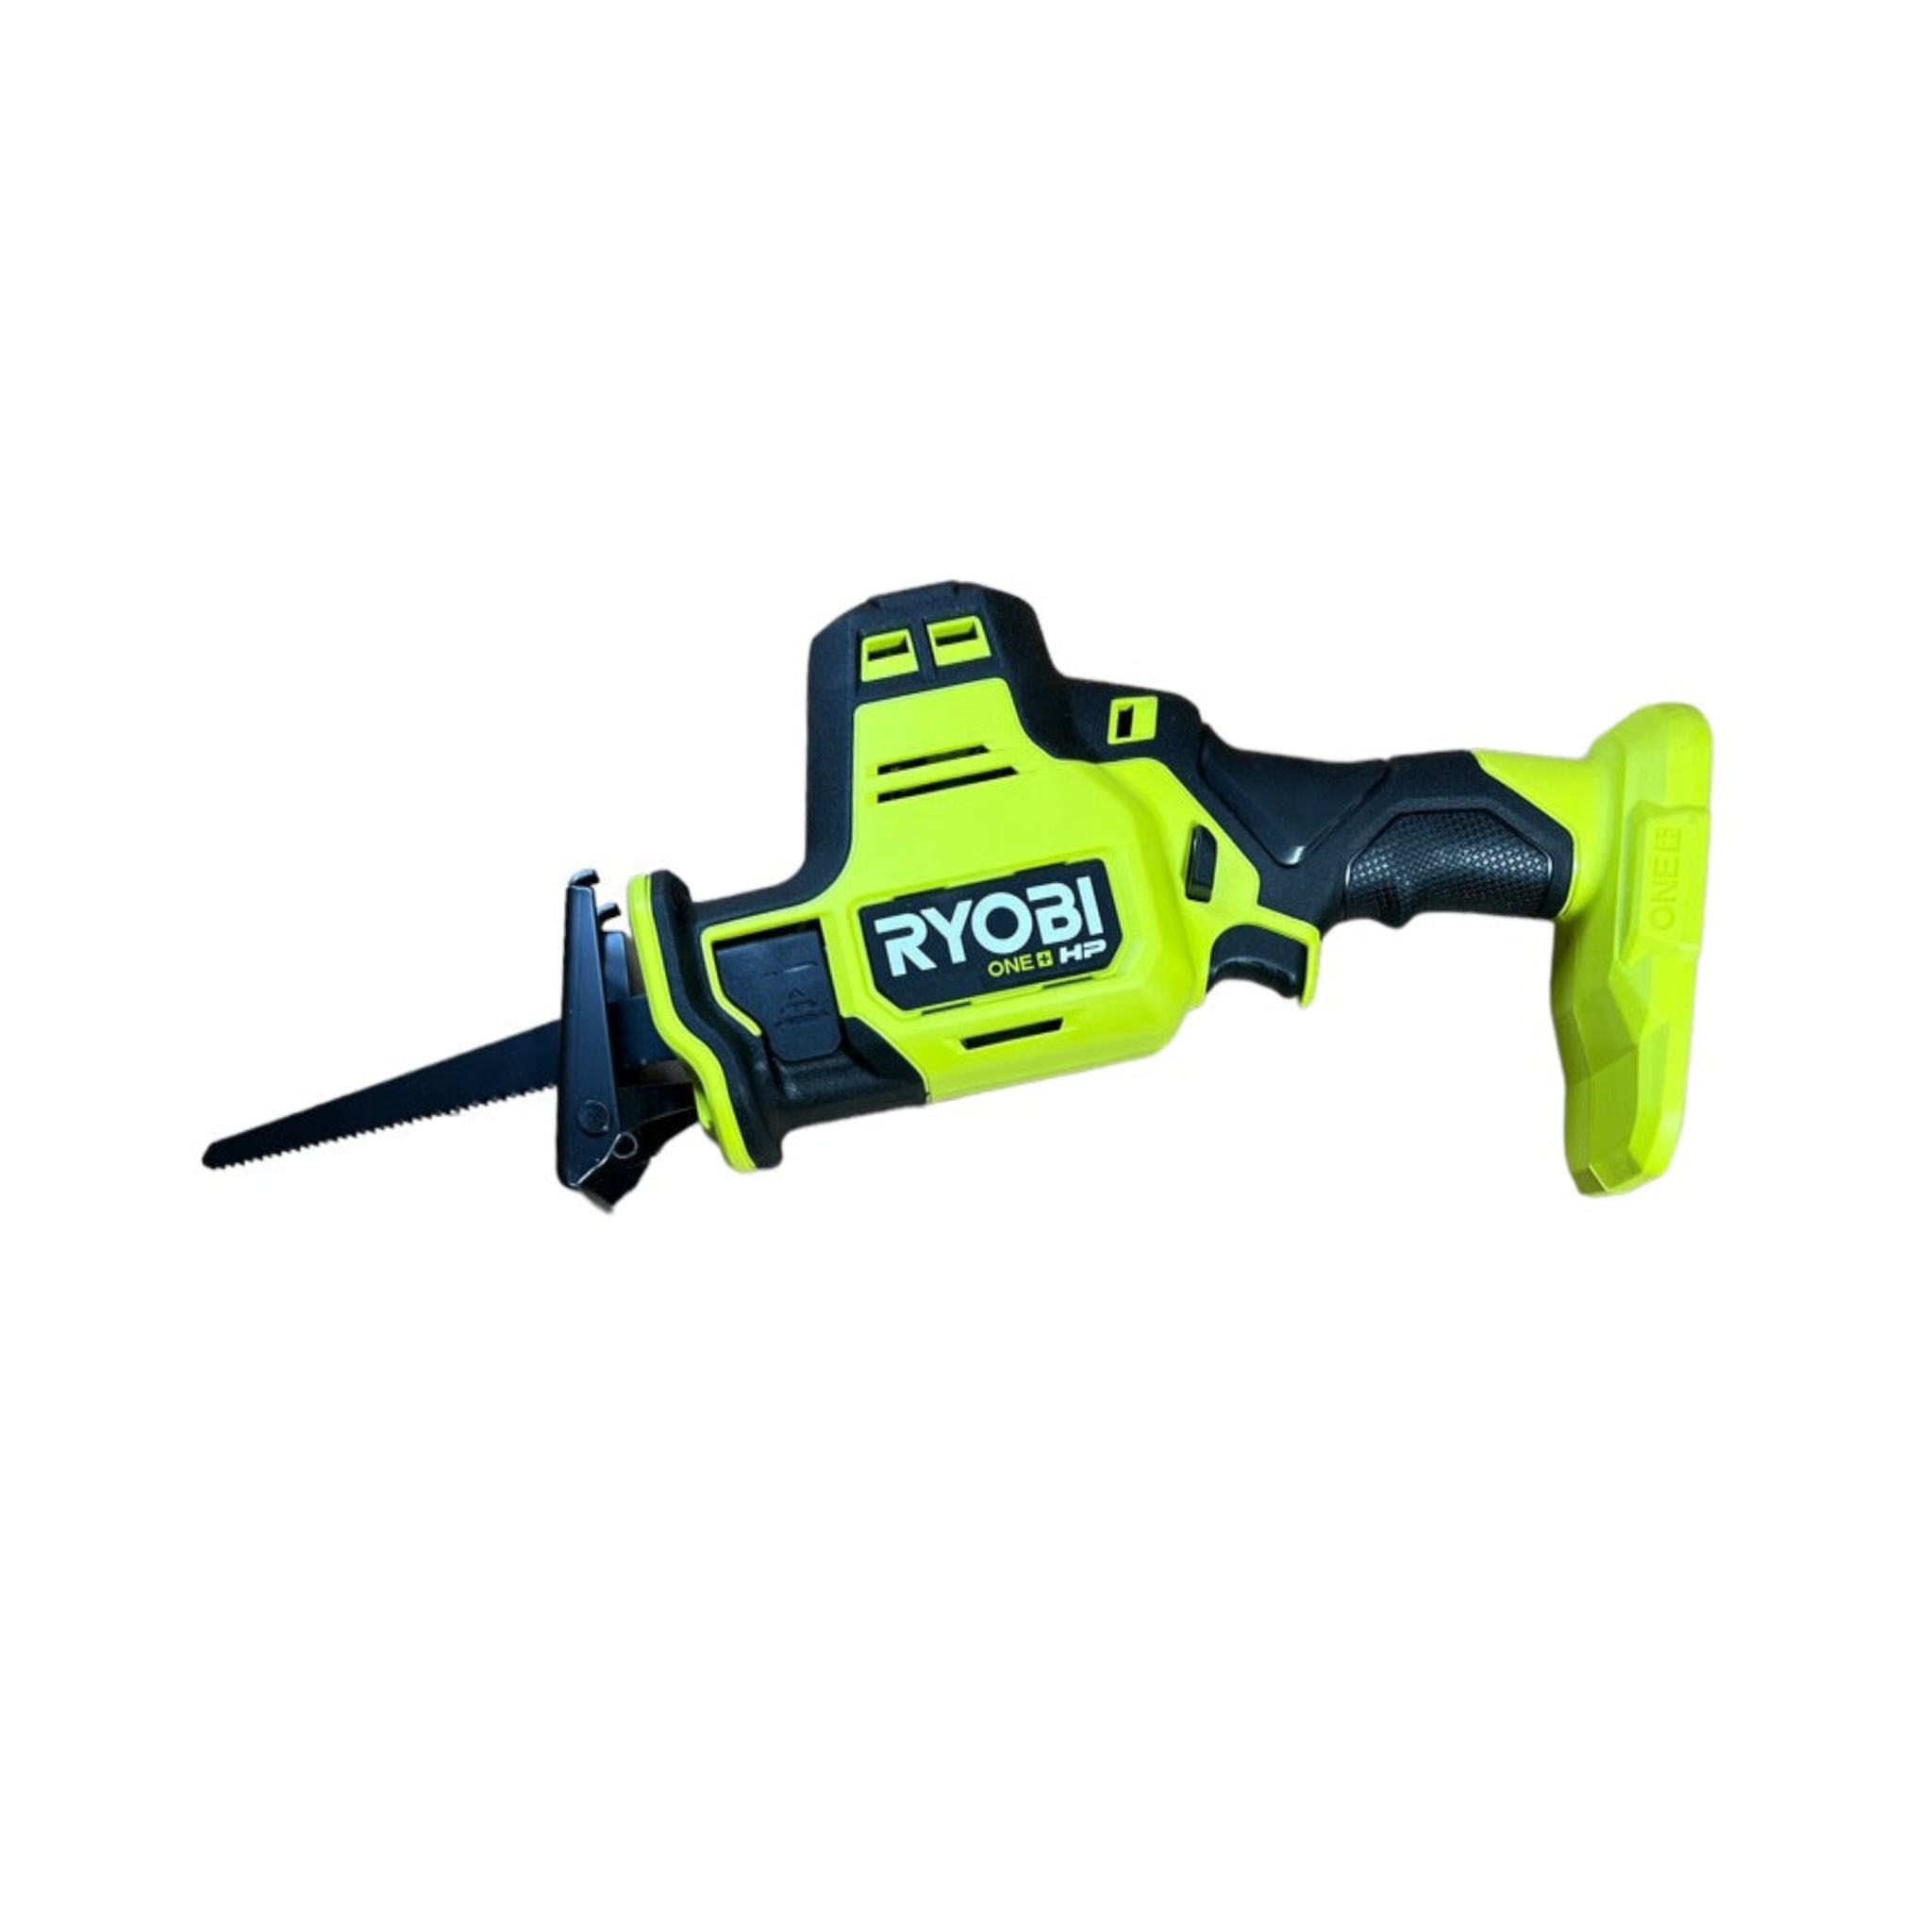 RYOBI ONE+ HP 18V Brushless Cordless Reciprocating Saw (Tool Only) - $ ·  DISCOUNT BROS